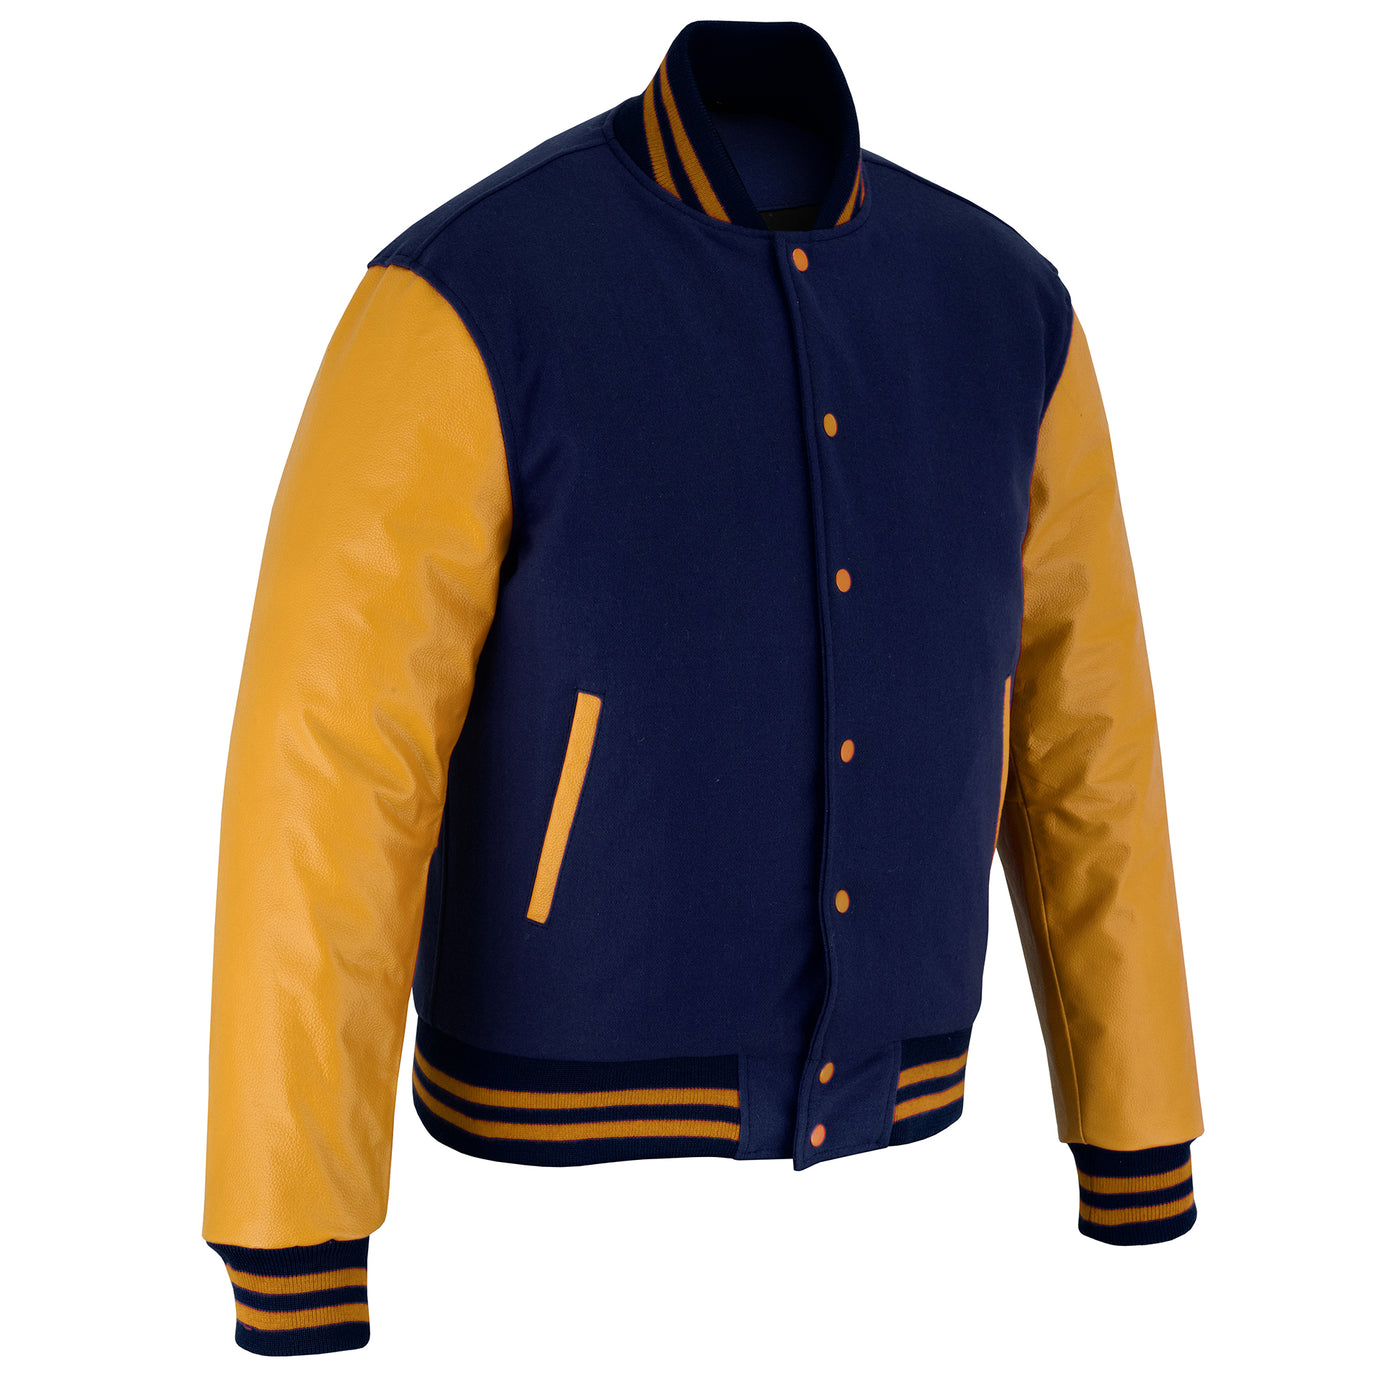 Classic Varsity Letterman Jacket Navy Blue Wool with Gold Genuine Leather Sleeves and trims